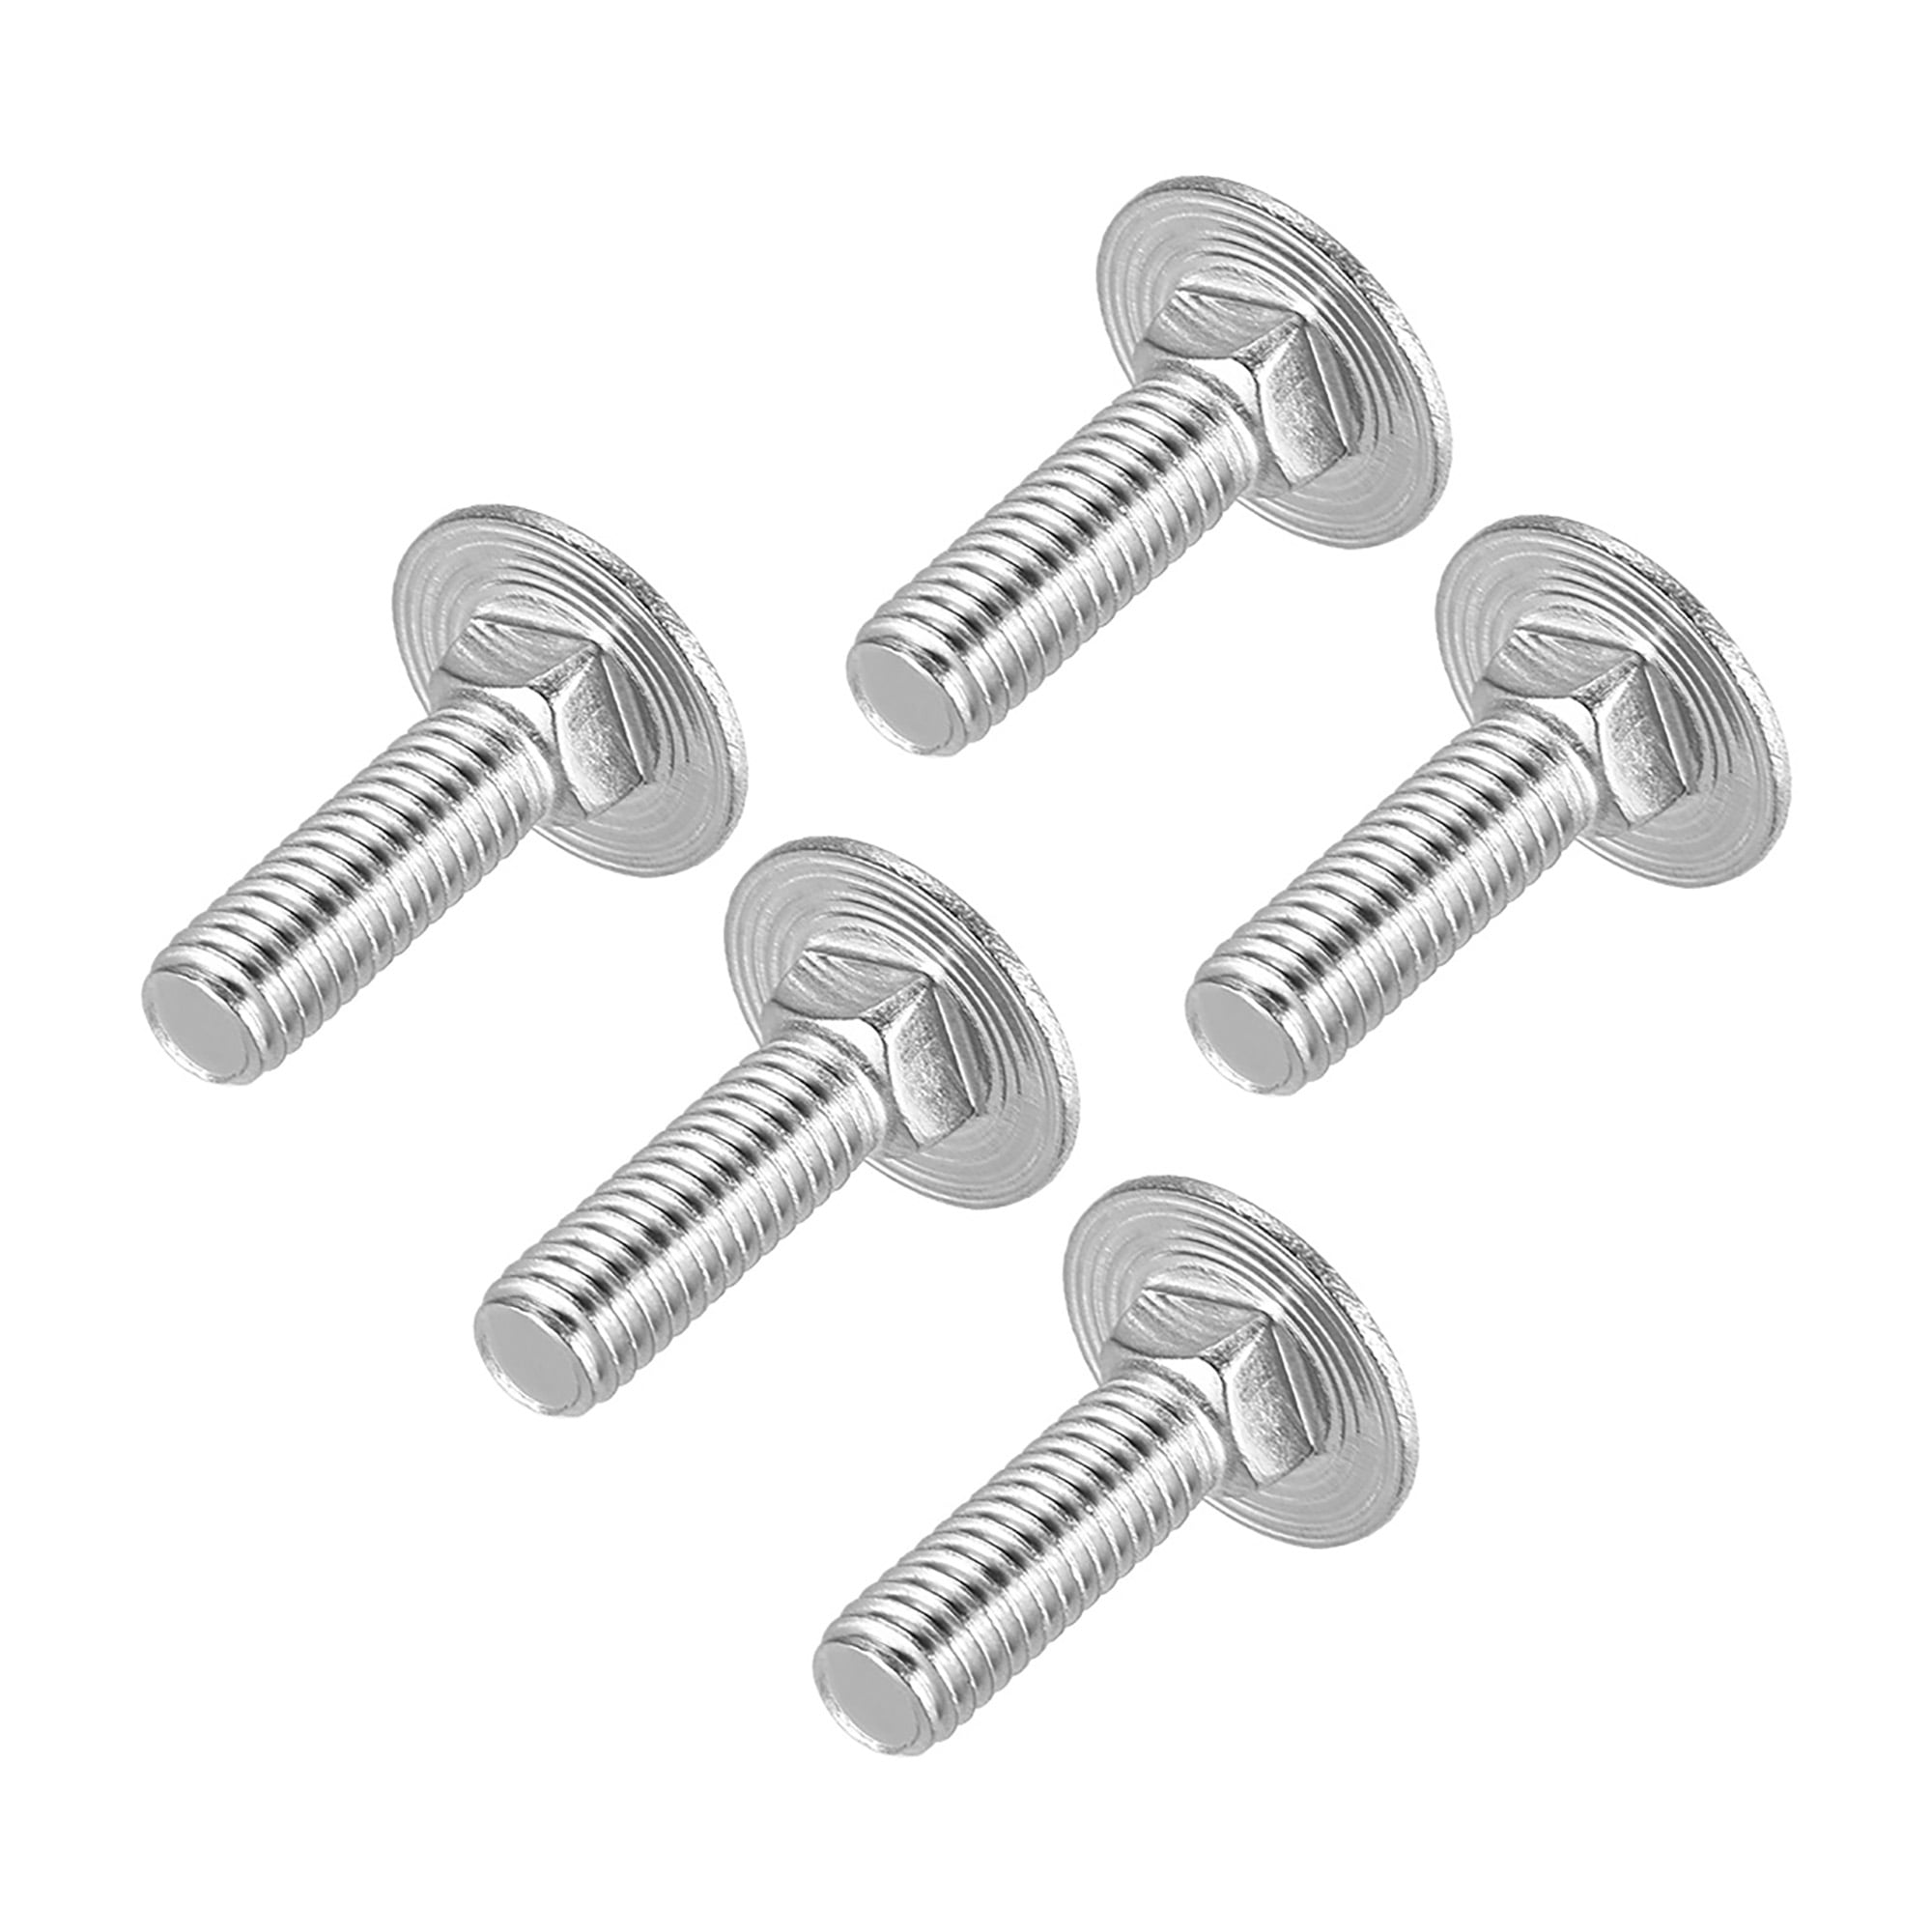 304 Stainless steel M6 M8 Full Thread Square Neck Bolts Coach Carriage Screw 